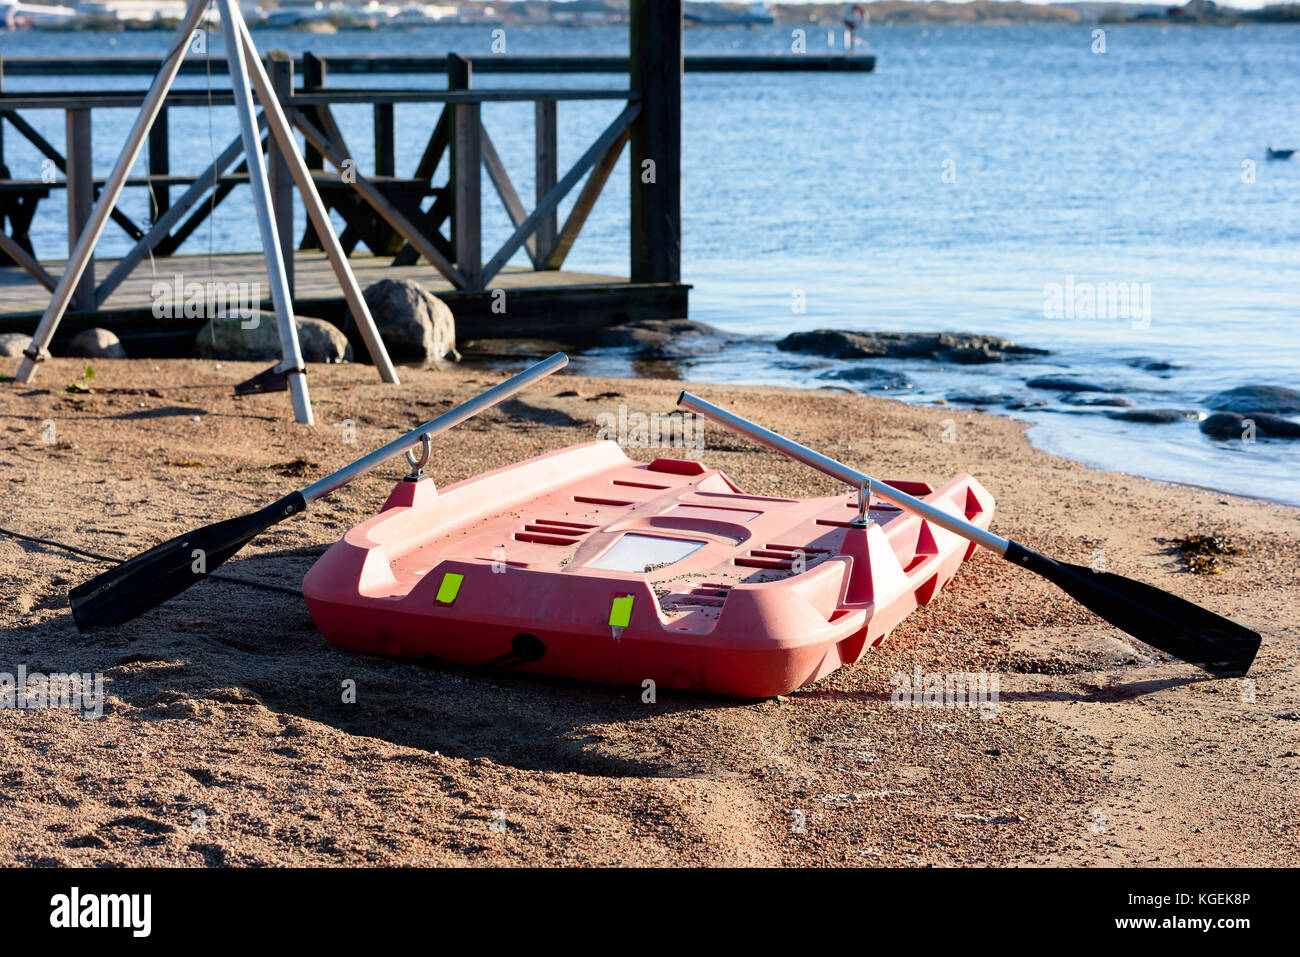 Life-saving equipment on beach. Orange plastic boat or raft with oars ready for use. Stock Photo